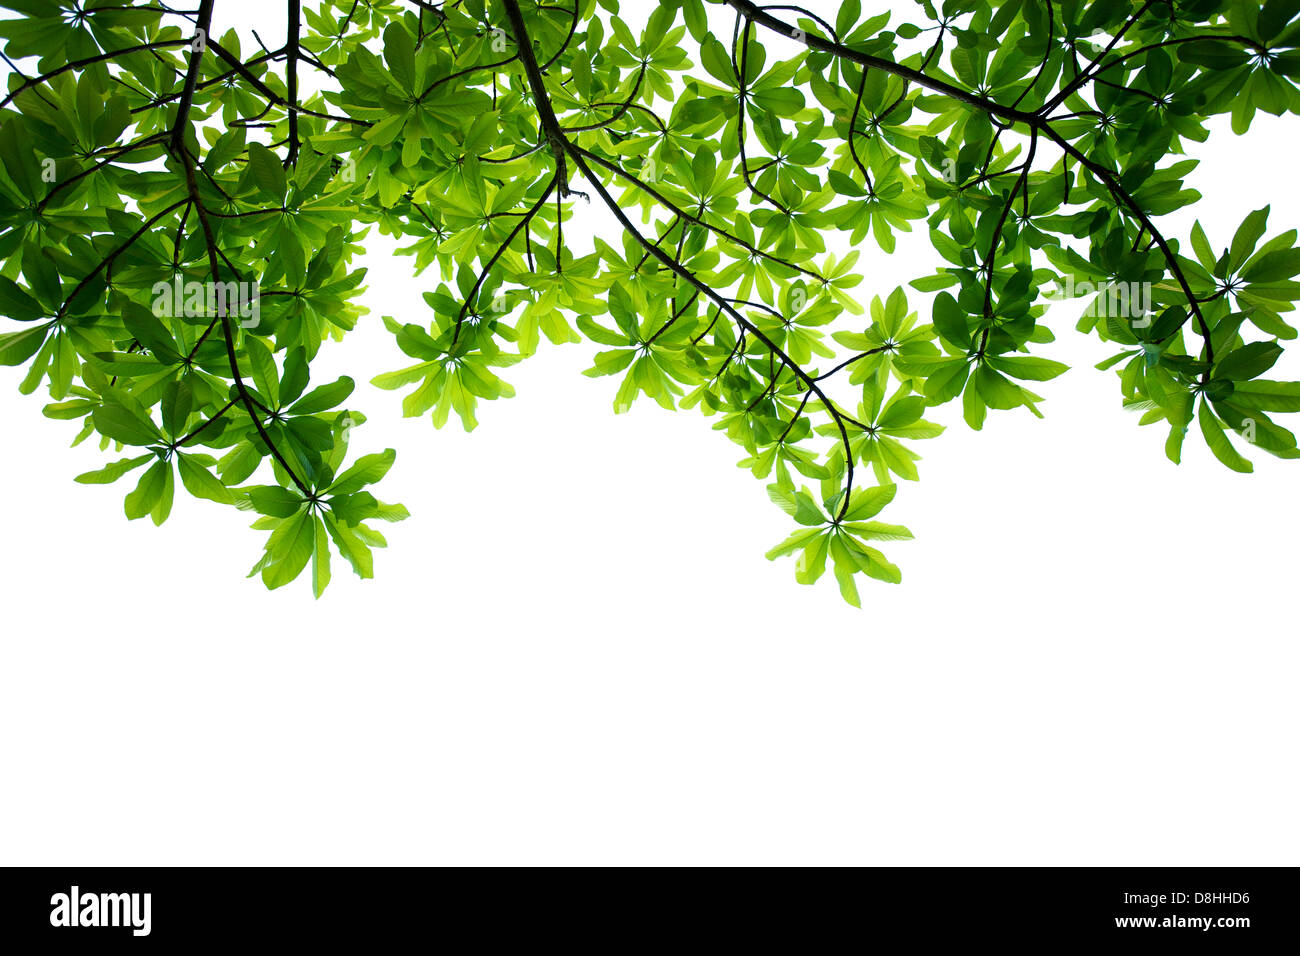 Spring leafs on white background. Stock Photo